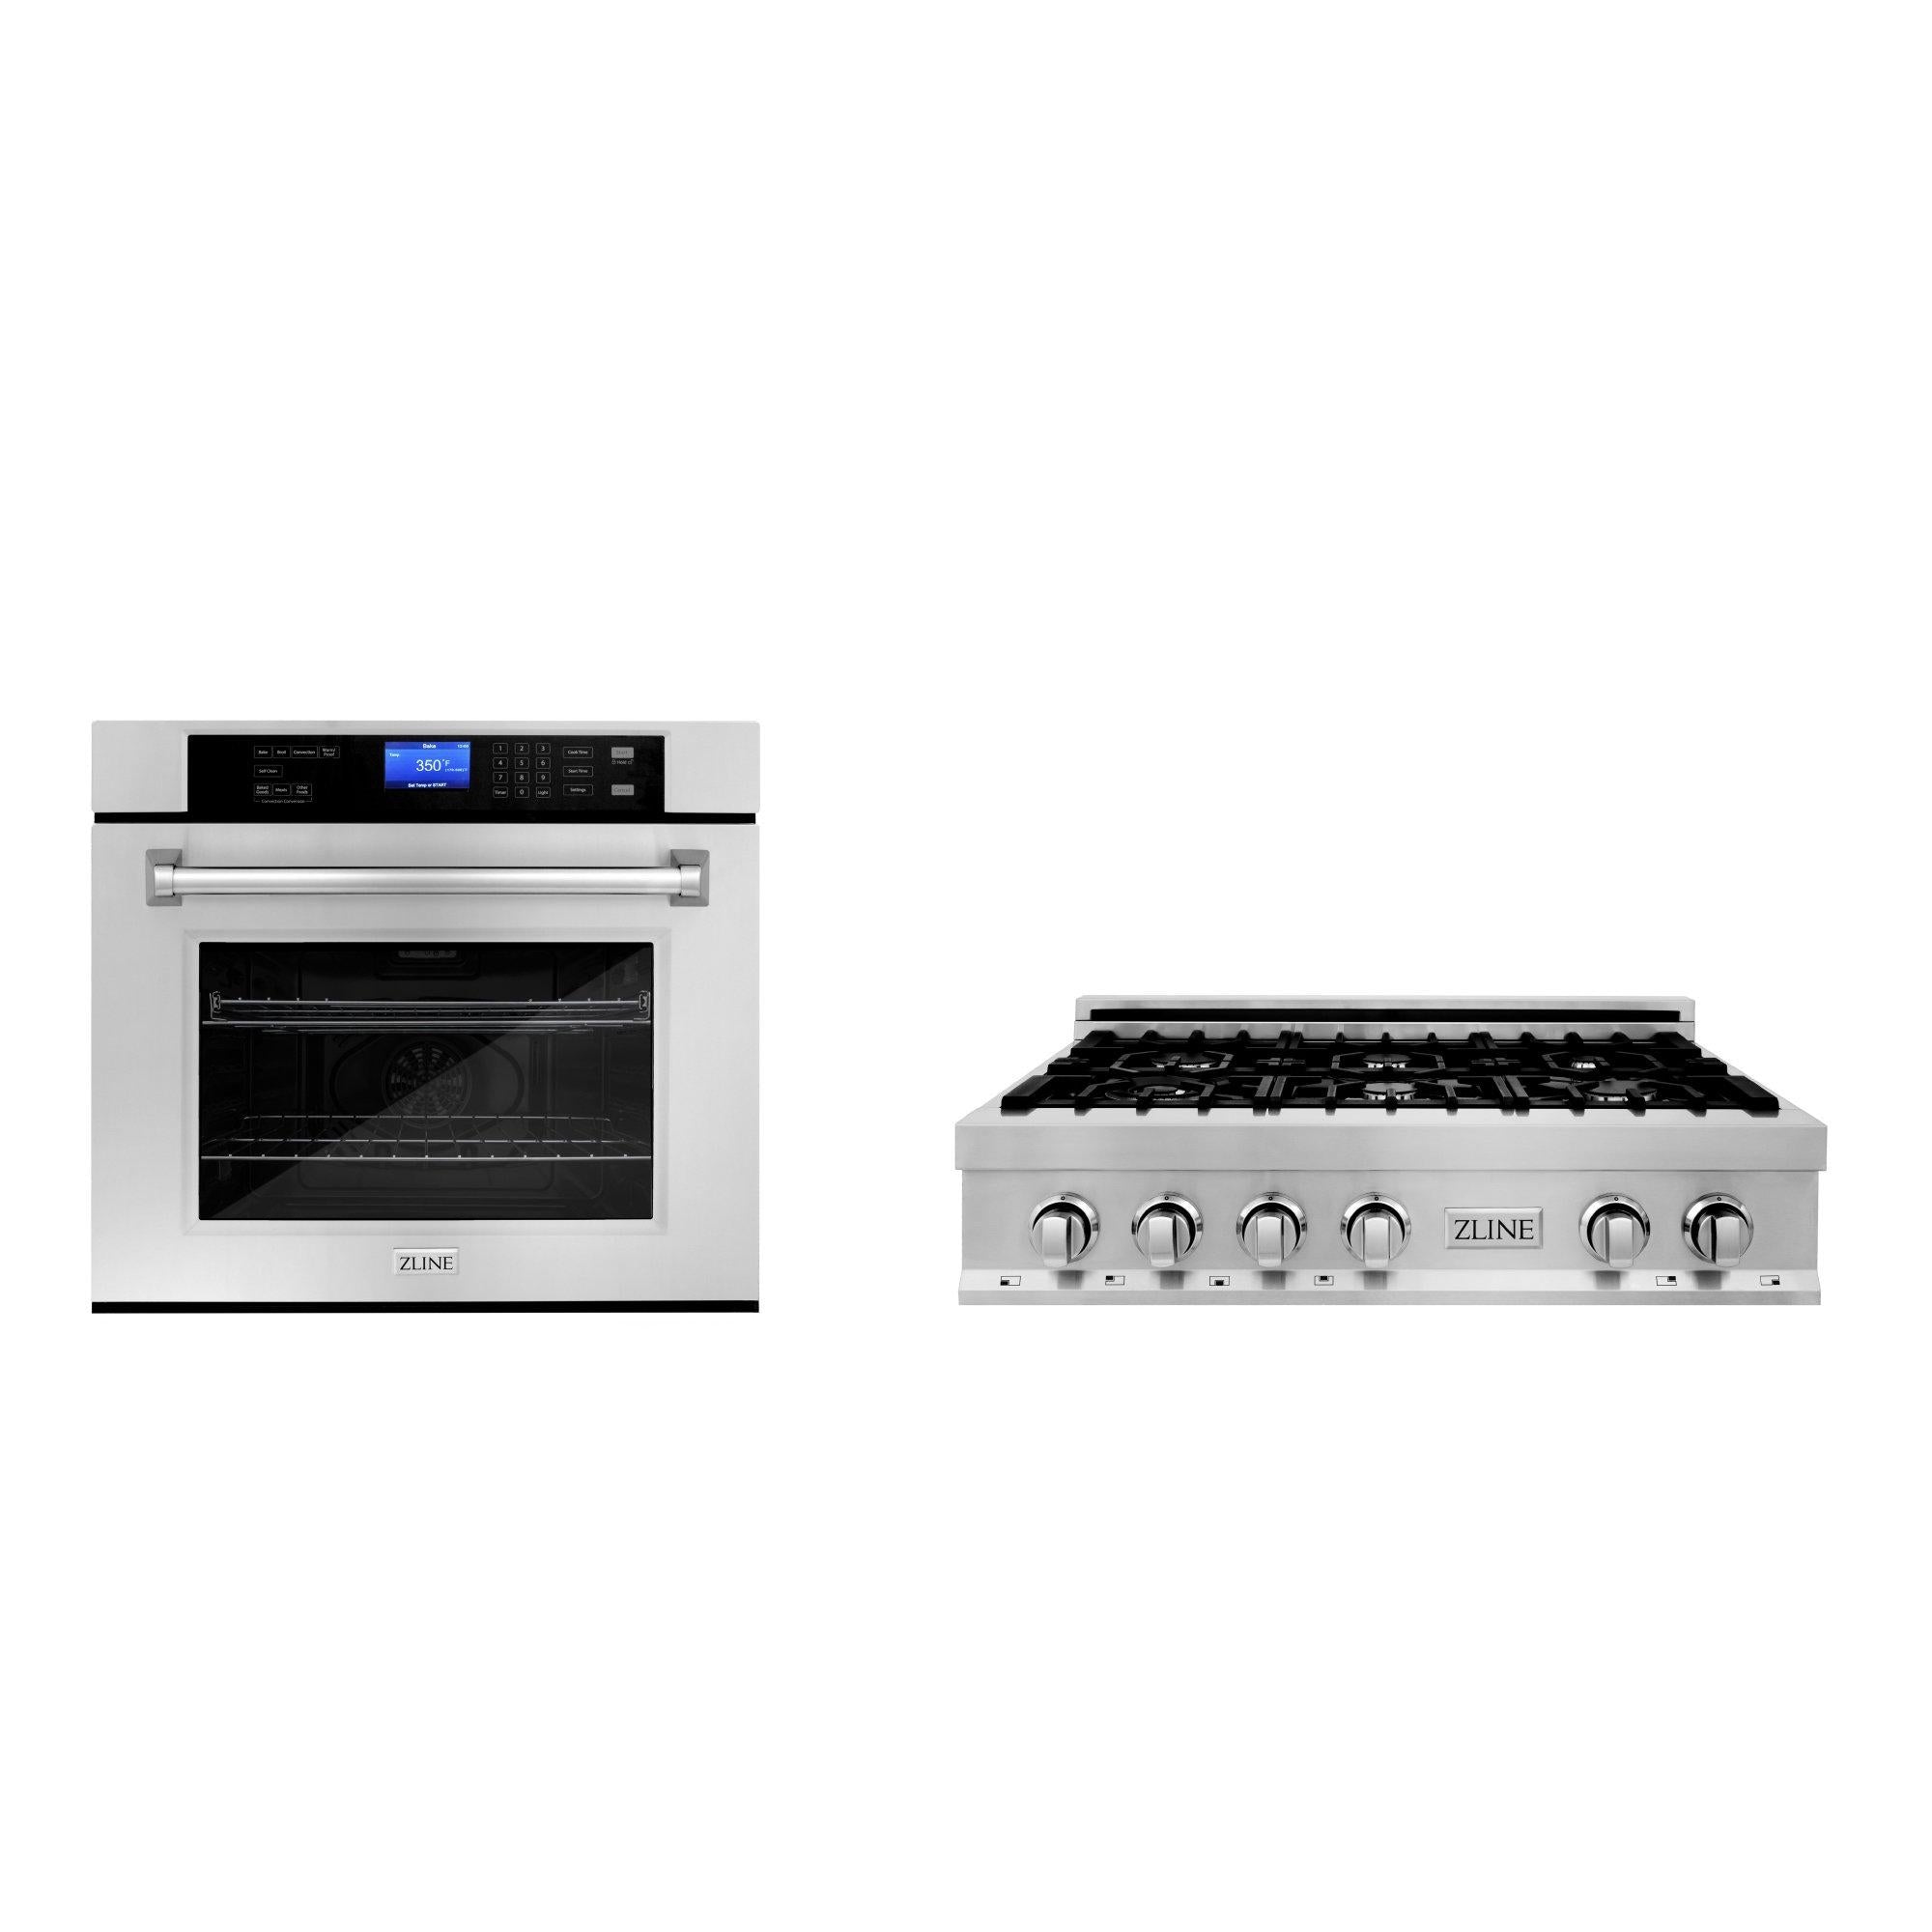 ZLINE KITCHEN AND BATH 2KPRTAWS36 ZLINE Kitchen Package with 36" Stainless Steel Rangetop and 30" Single Wall Oven